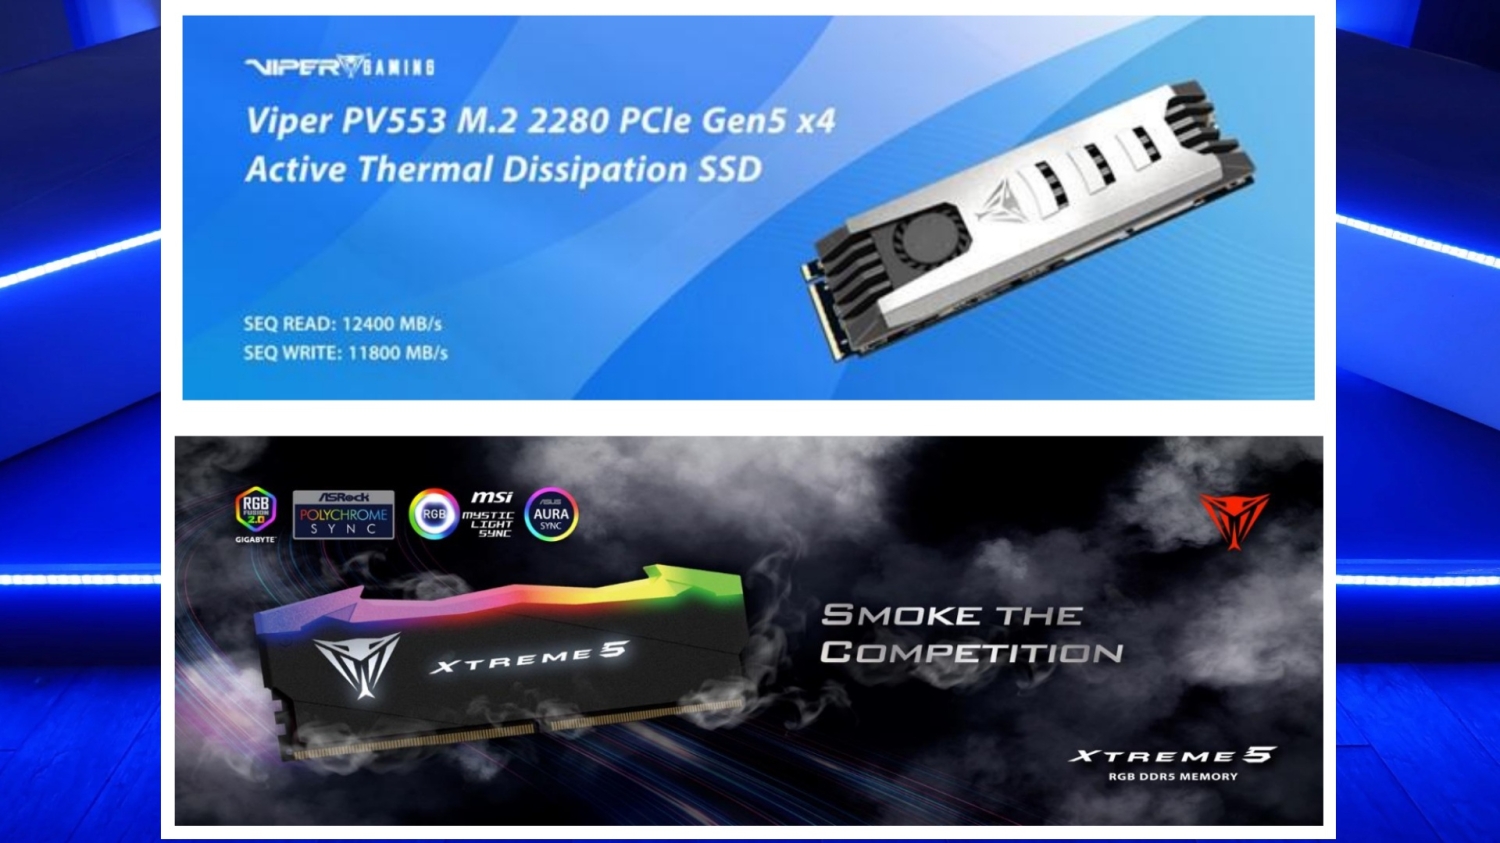 TweakTown Enlarged Image - Patriot Viper PV553 Gen5 SSD and Viper Xtreme 5 DDR5 memory to be showcased at Computex 2023, image credit: Patriot Group.